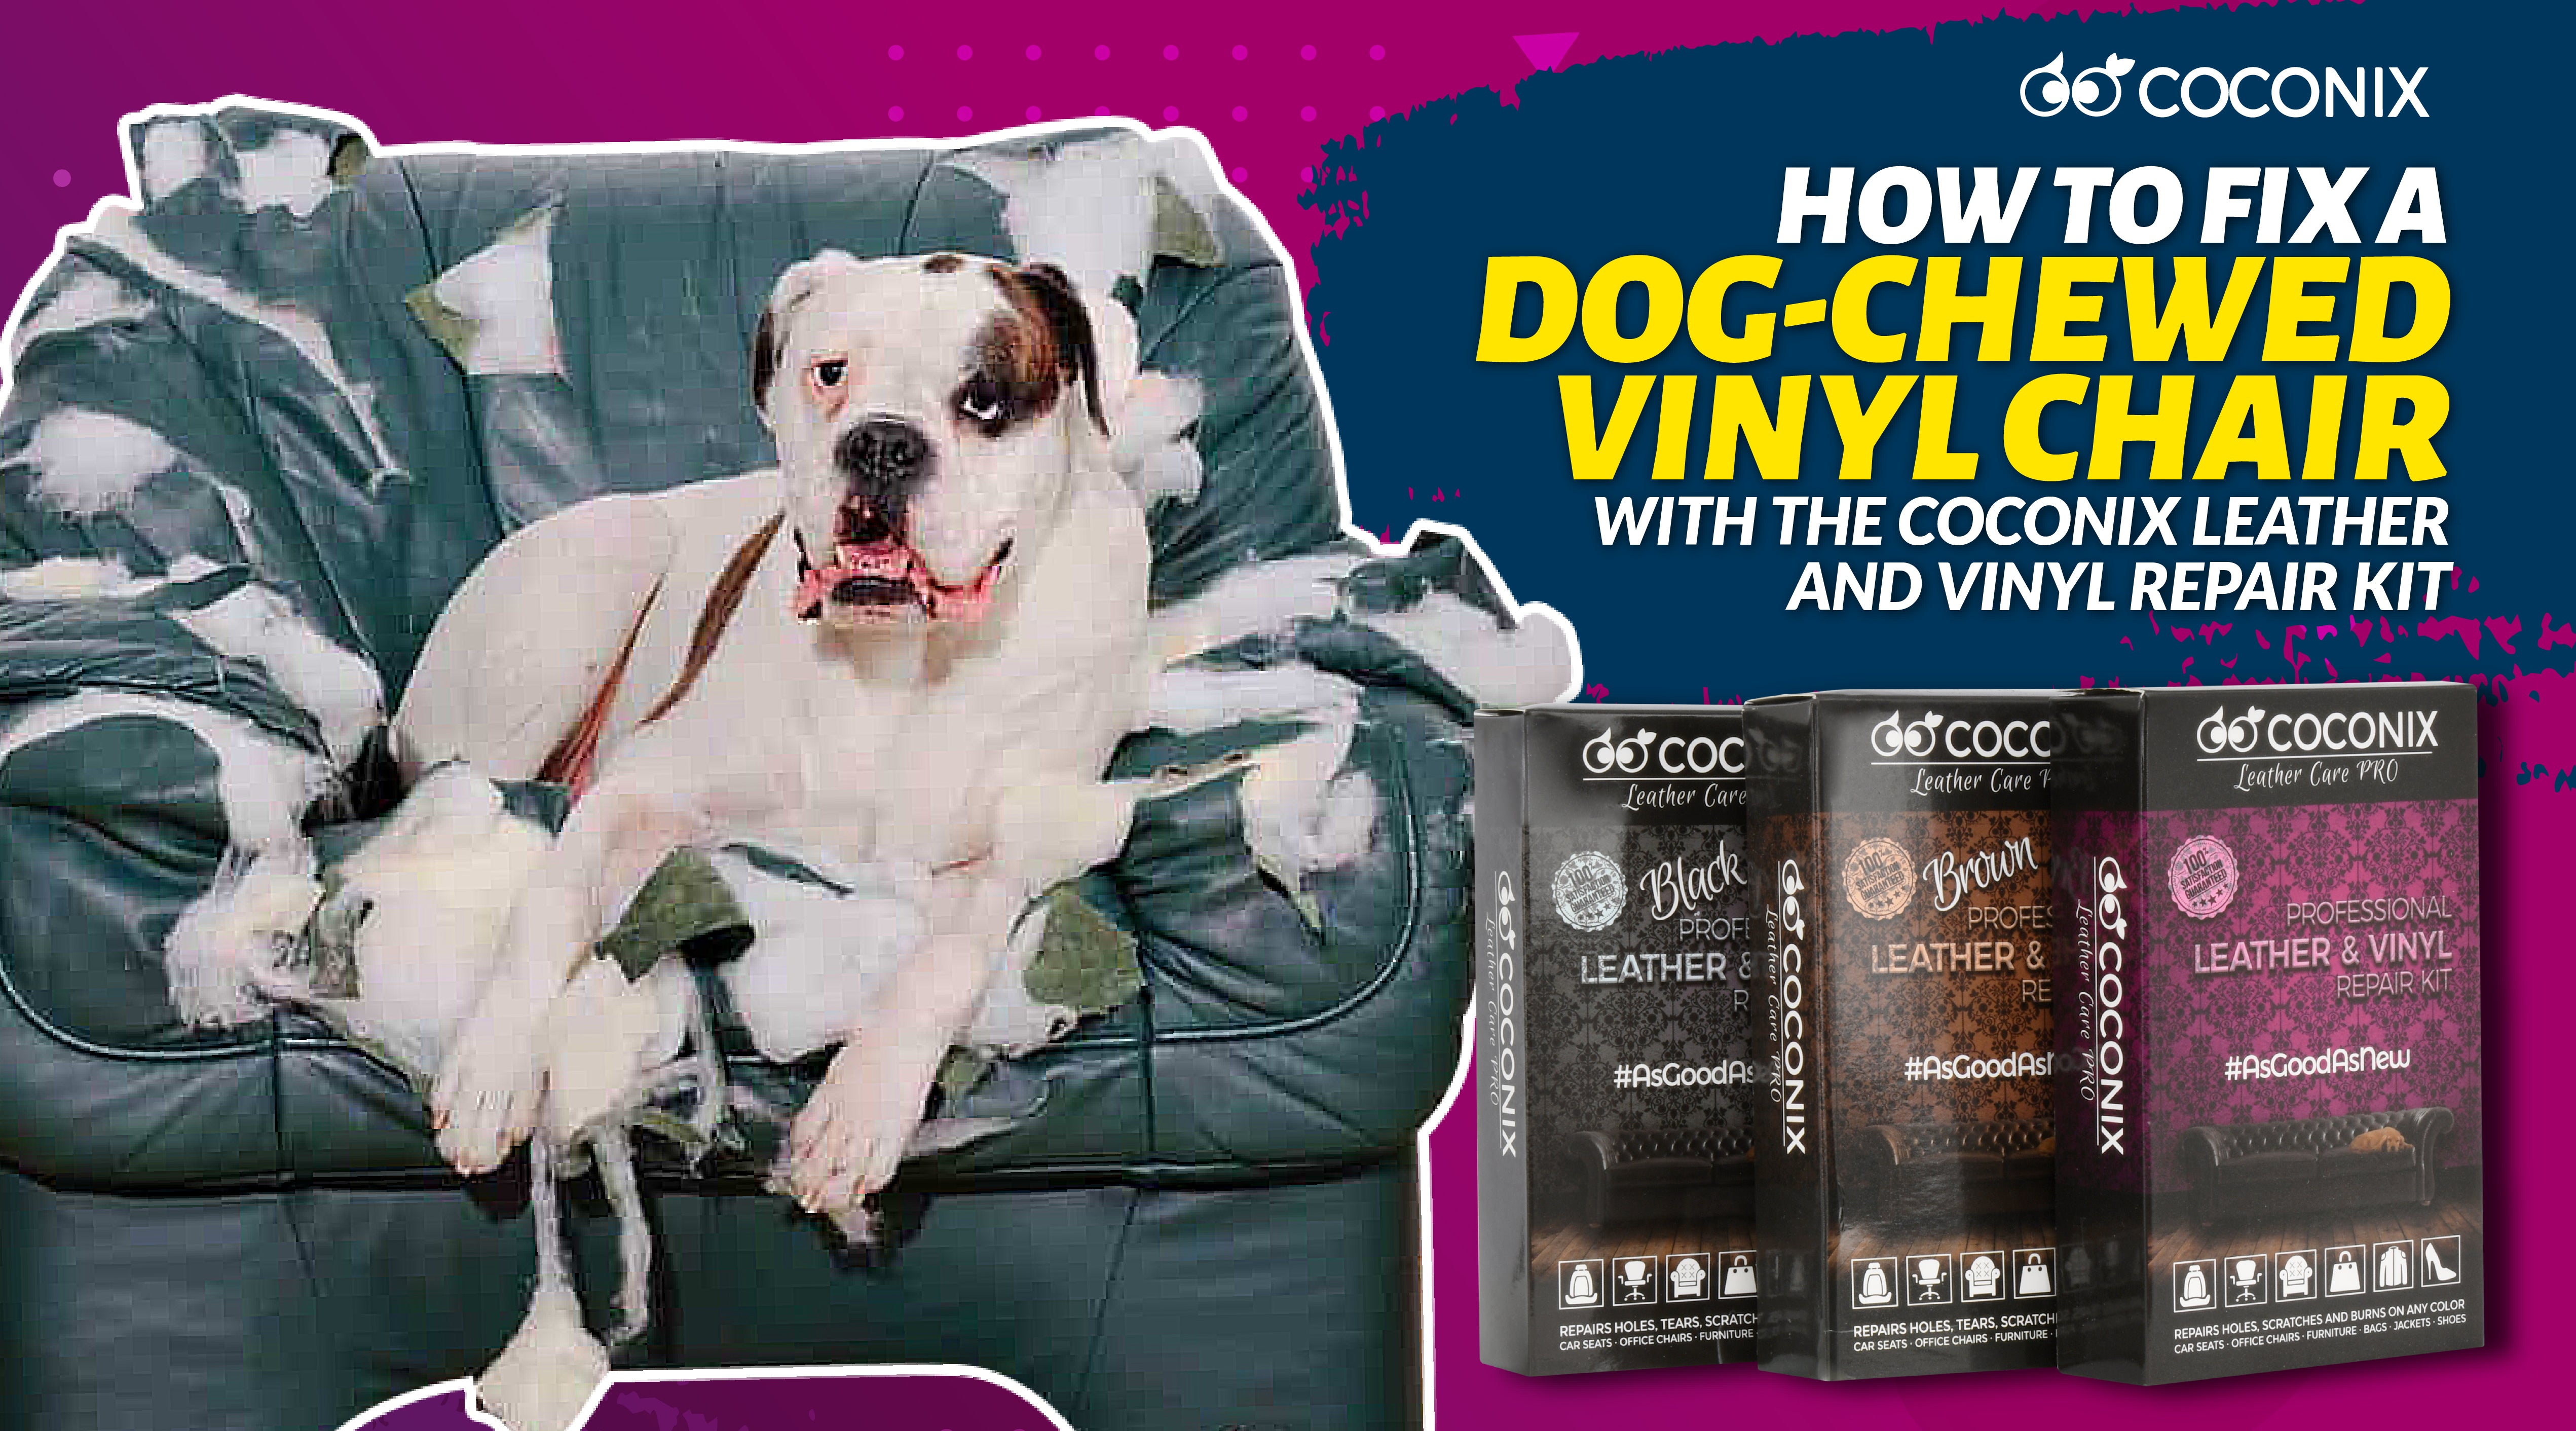 How to fix a dog-chewed vinyl chair with the Coconix Leather and